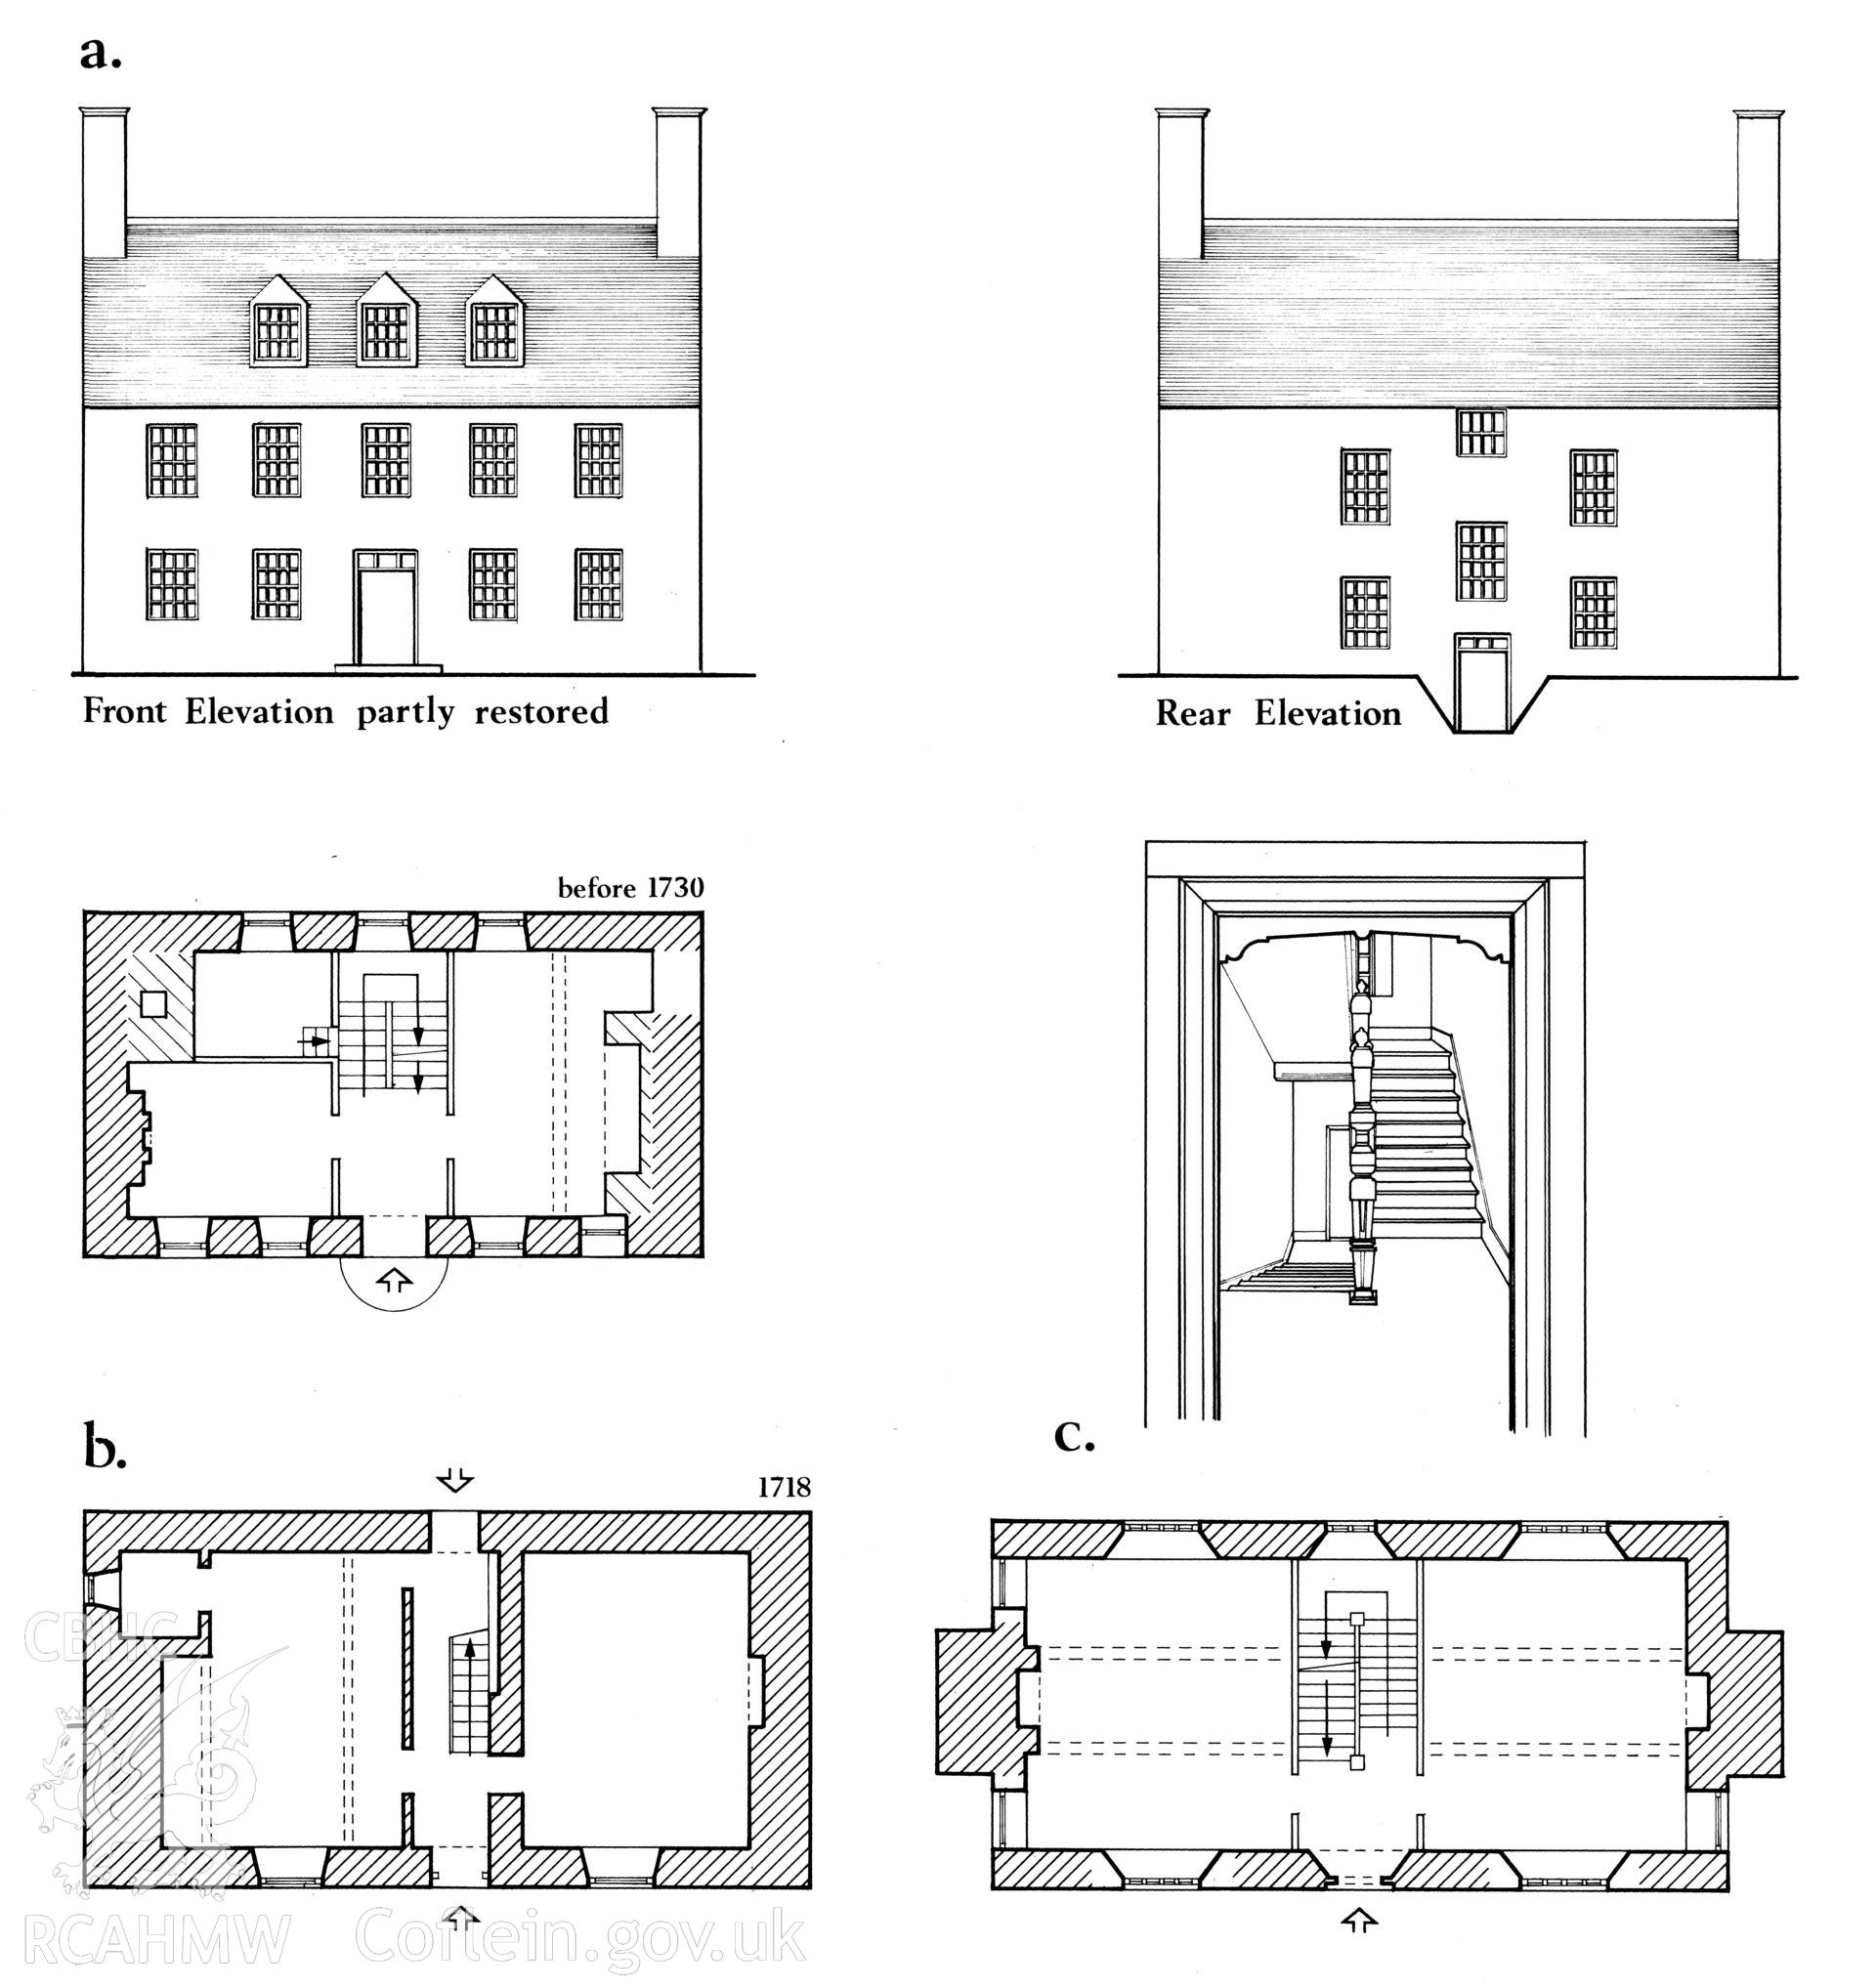 Multi-site RCAHMW drawing, 3 sites, (ink on linen) showing plan, elevation and detail of houses with central stair passage and gable chimney.  Published in Houses of the Welsh Countryside, fig 143.